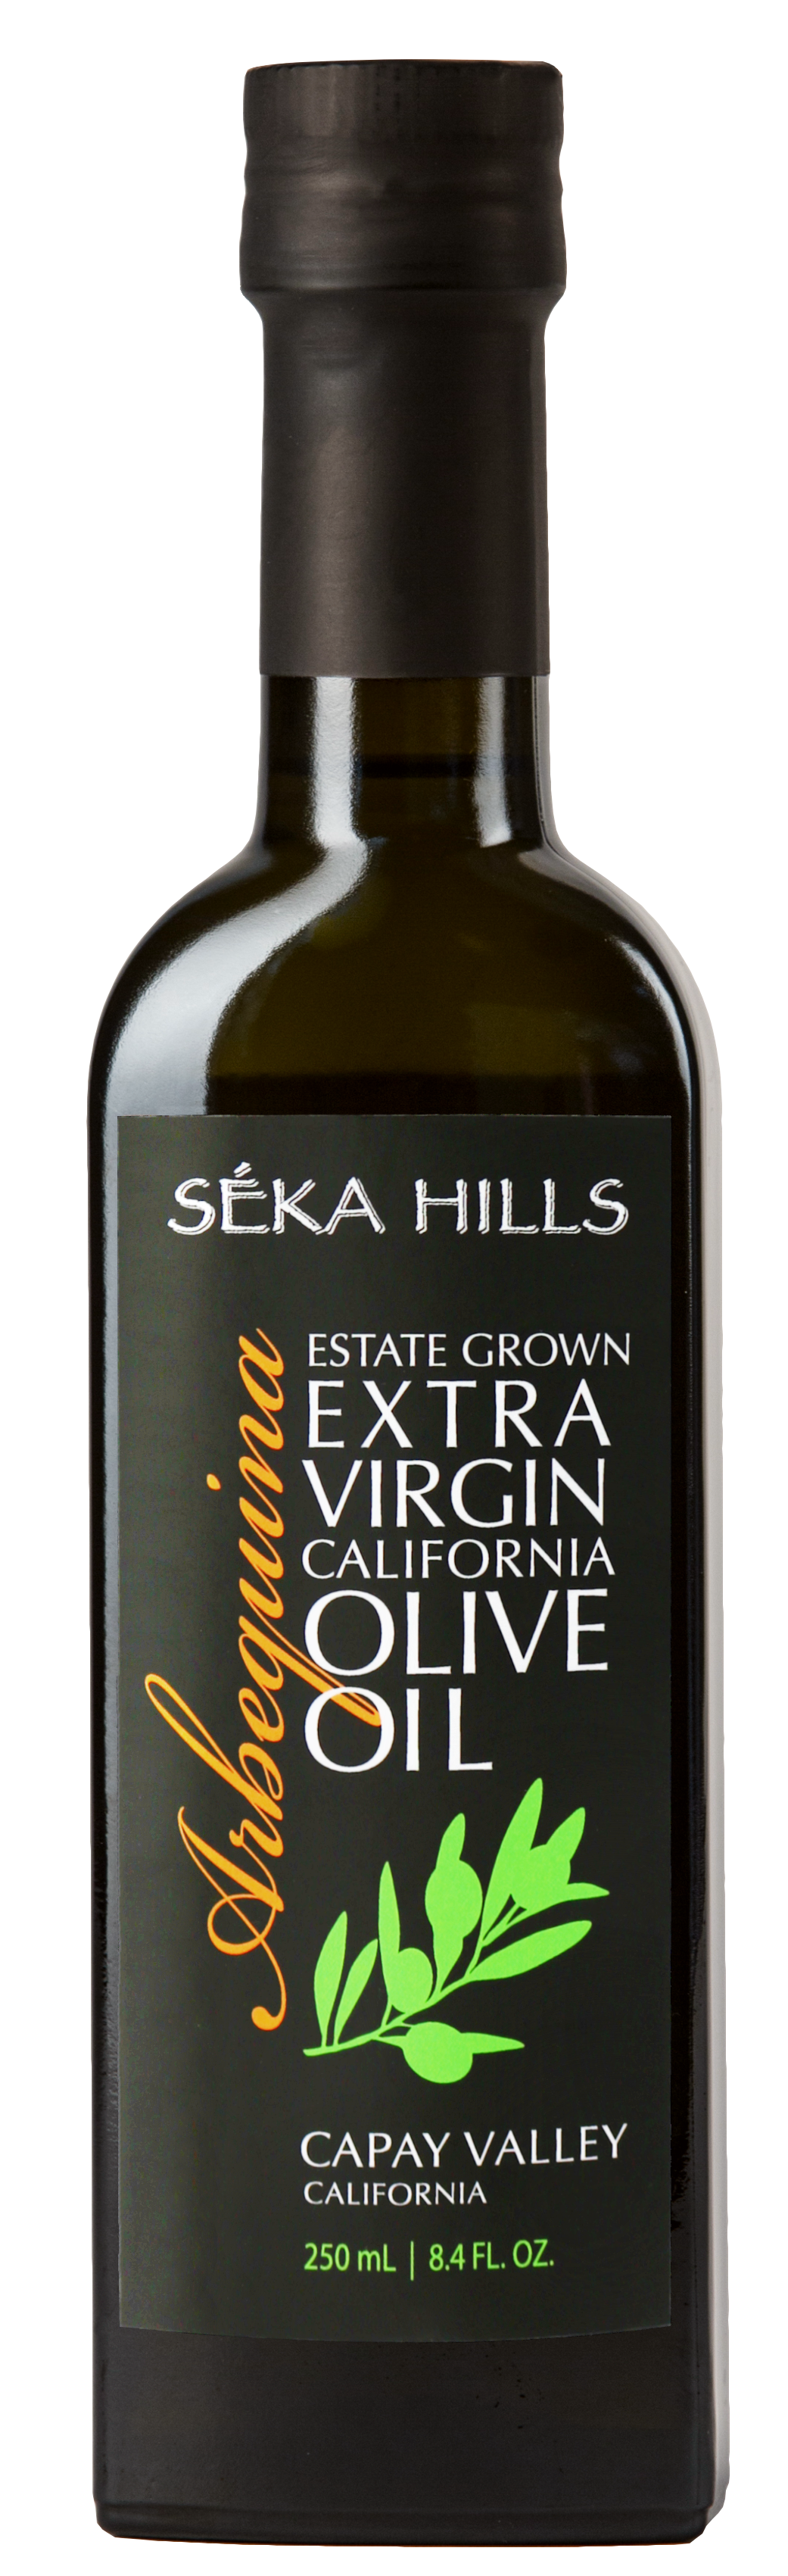 Arbequina Extra Virgin Olive Oil 250ml by Seka Hills